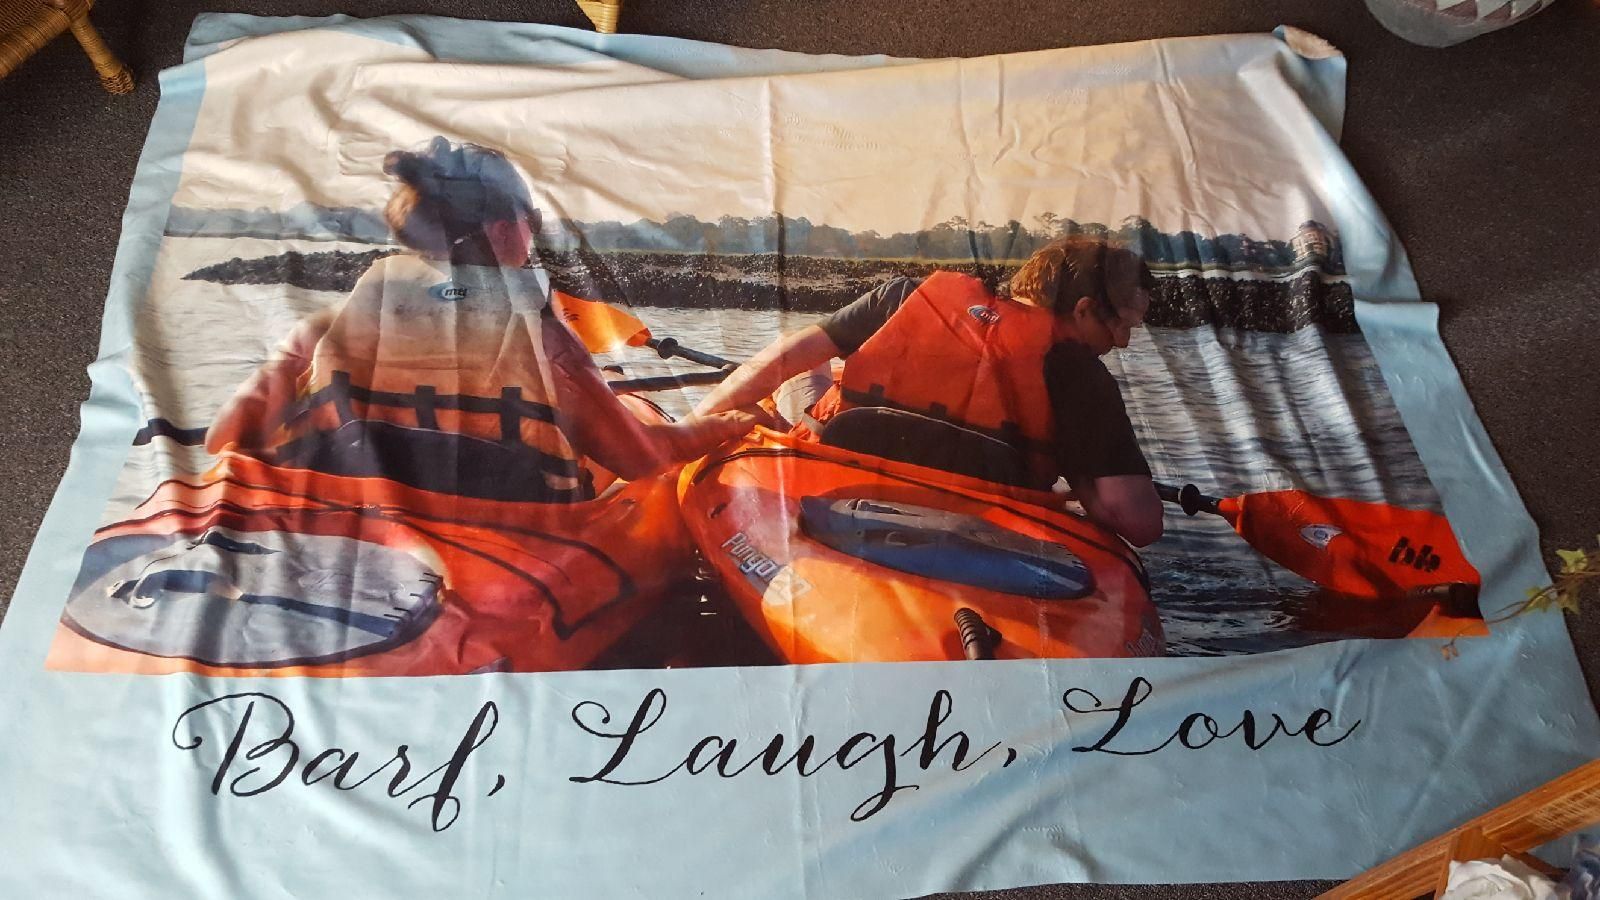 Went on a beach vacation, Dad thought he was capturing a tender moment... Boyfriend just asked me to hold onto his boat while he puked. Naturally, I blew it up and put it on a blanket.